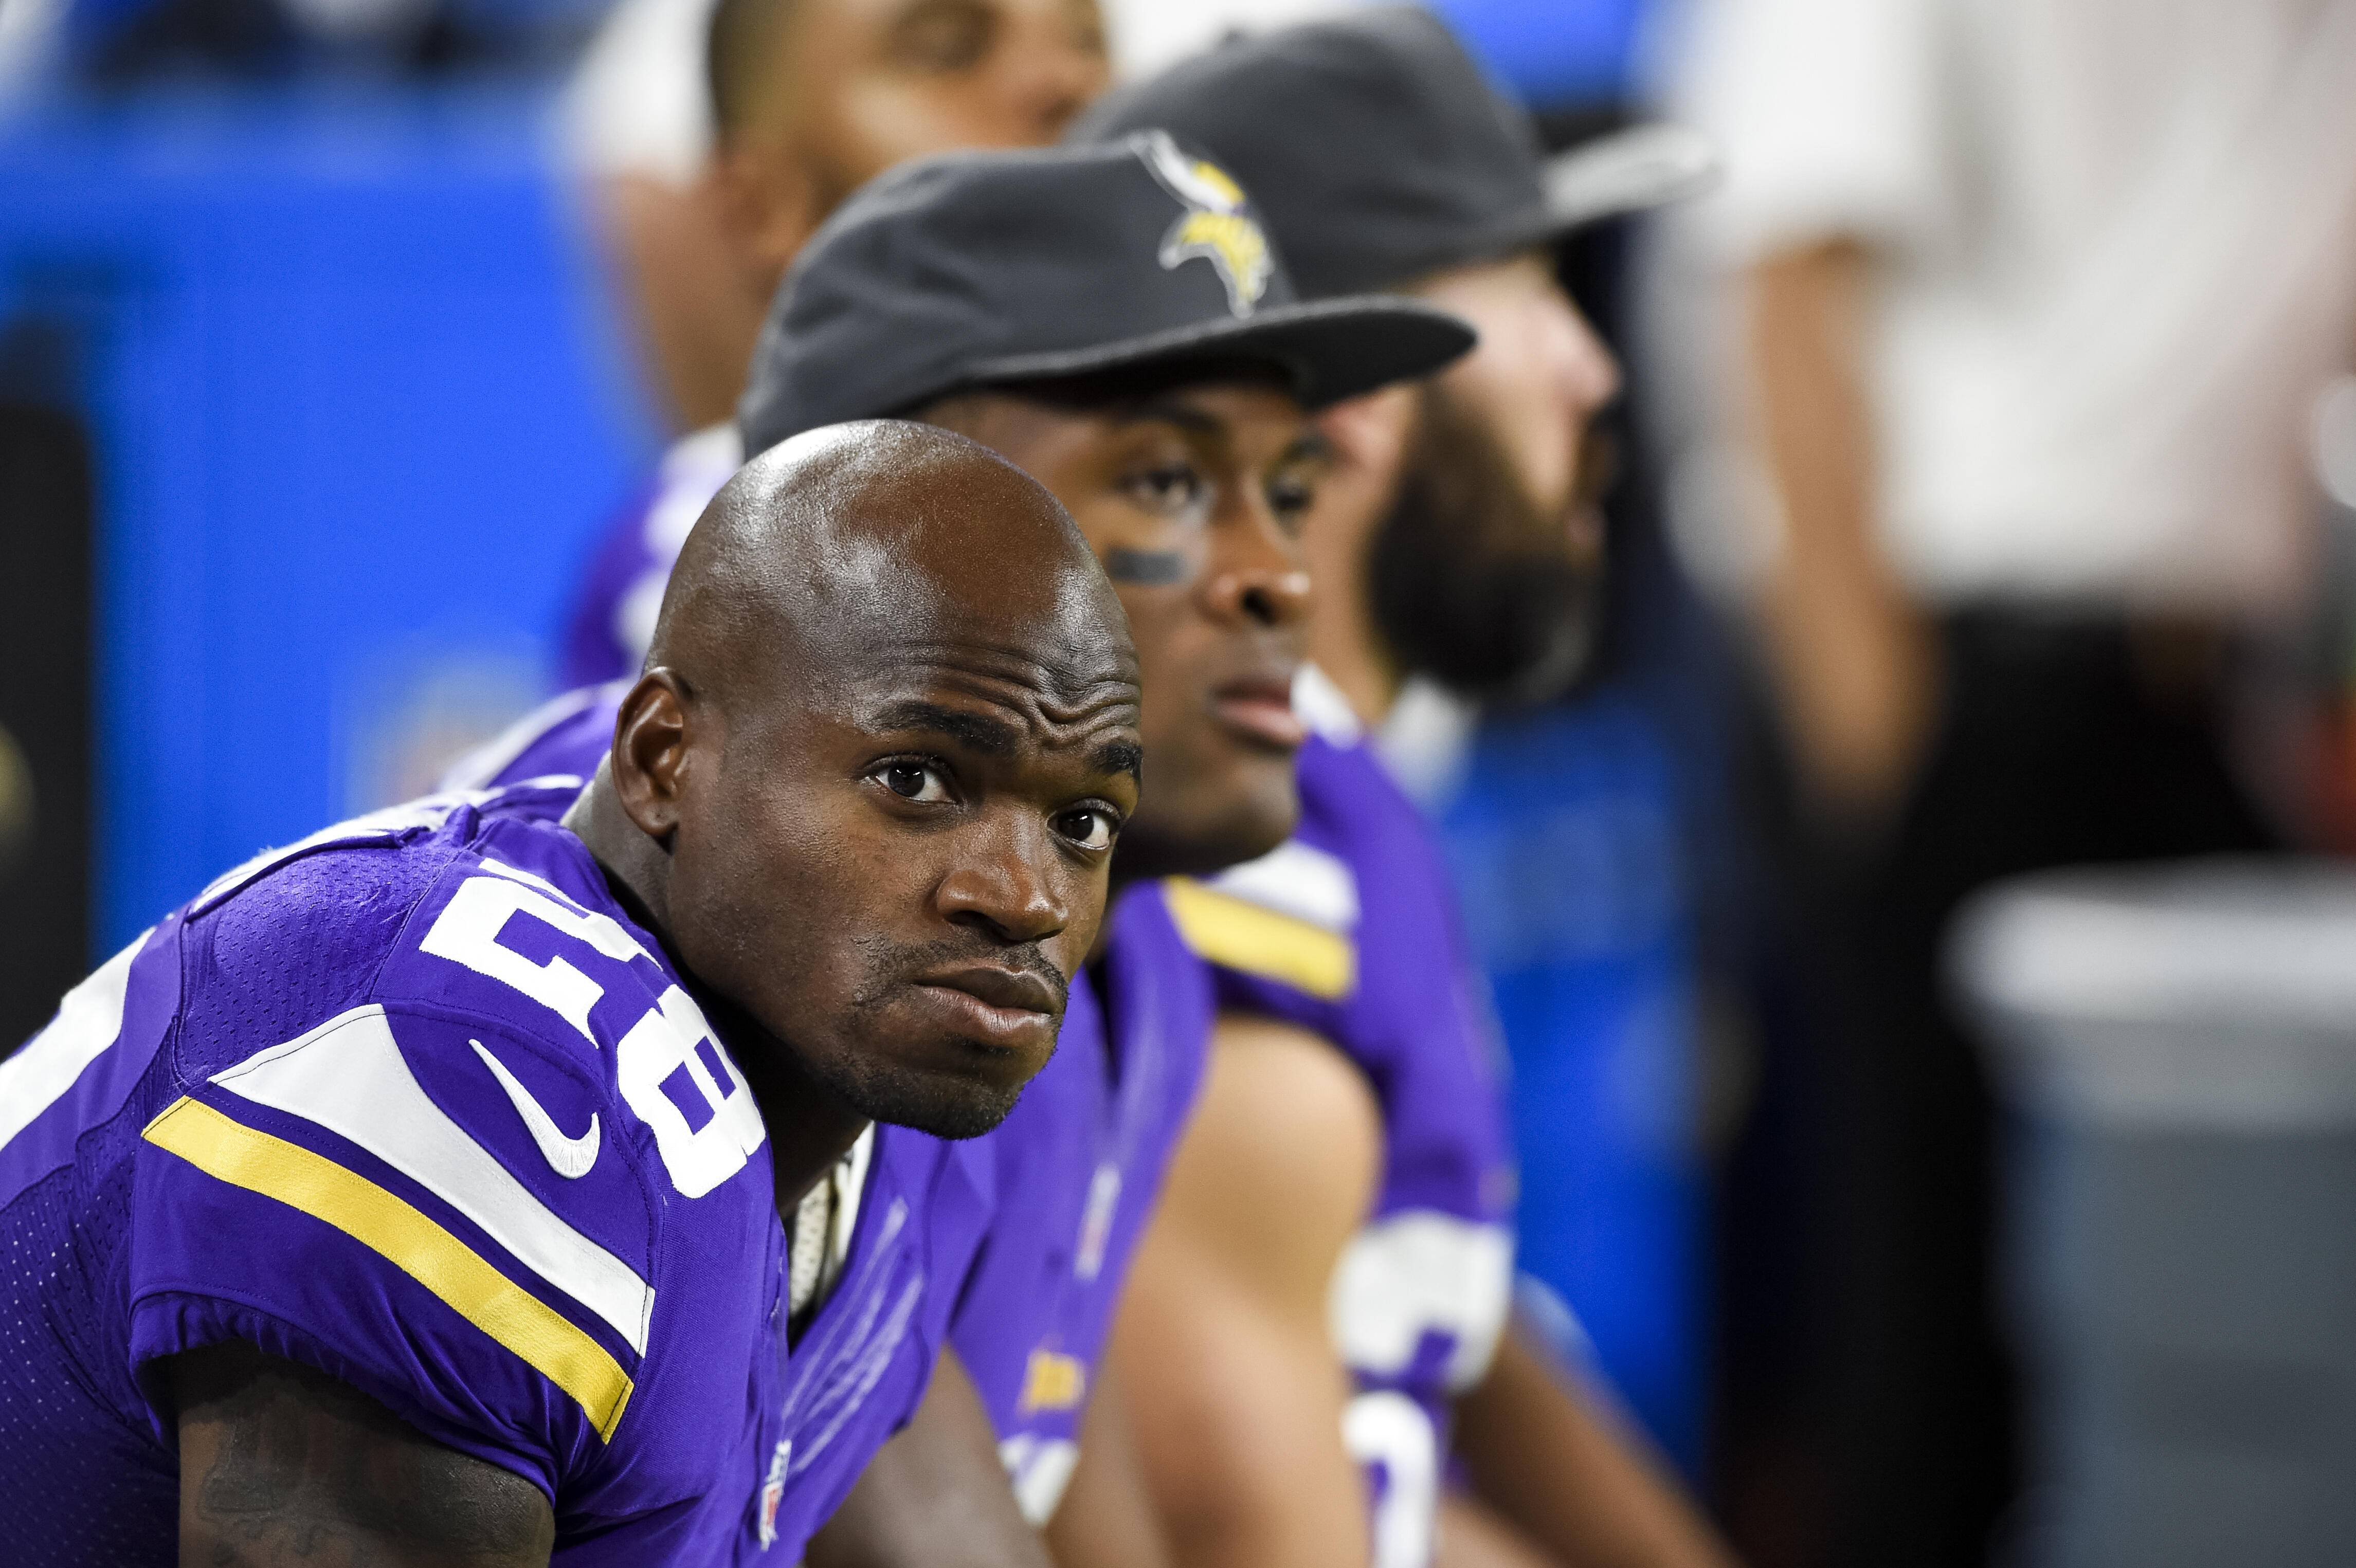 MINNEAPOLIS, MN - SEPTEMBER 1: Adrian Peterson #28 of the Minnesota Vikings looks on during the game against the Los Angeles Rams on September 1, 2016 at US Bank Stadium in Minneapolis, Minnesota. The Vikings defeated the Rams 27-25. (Photo by Hannah Fosl